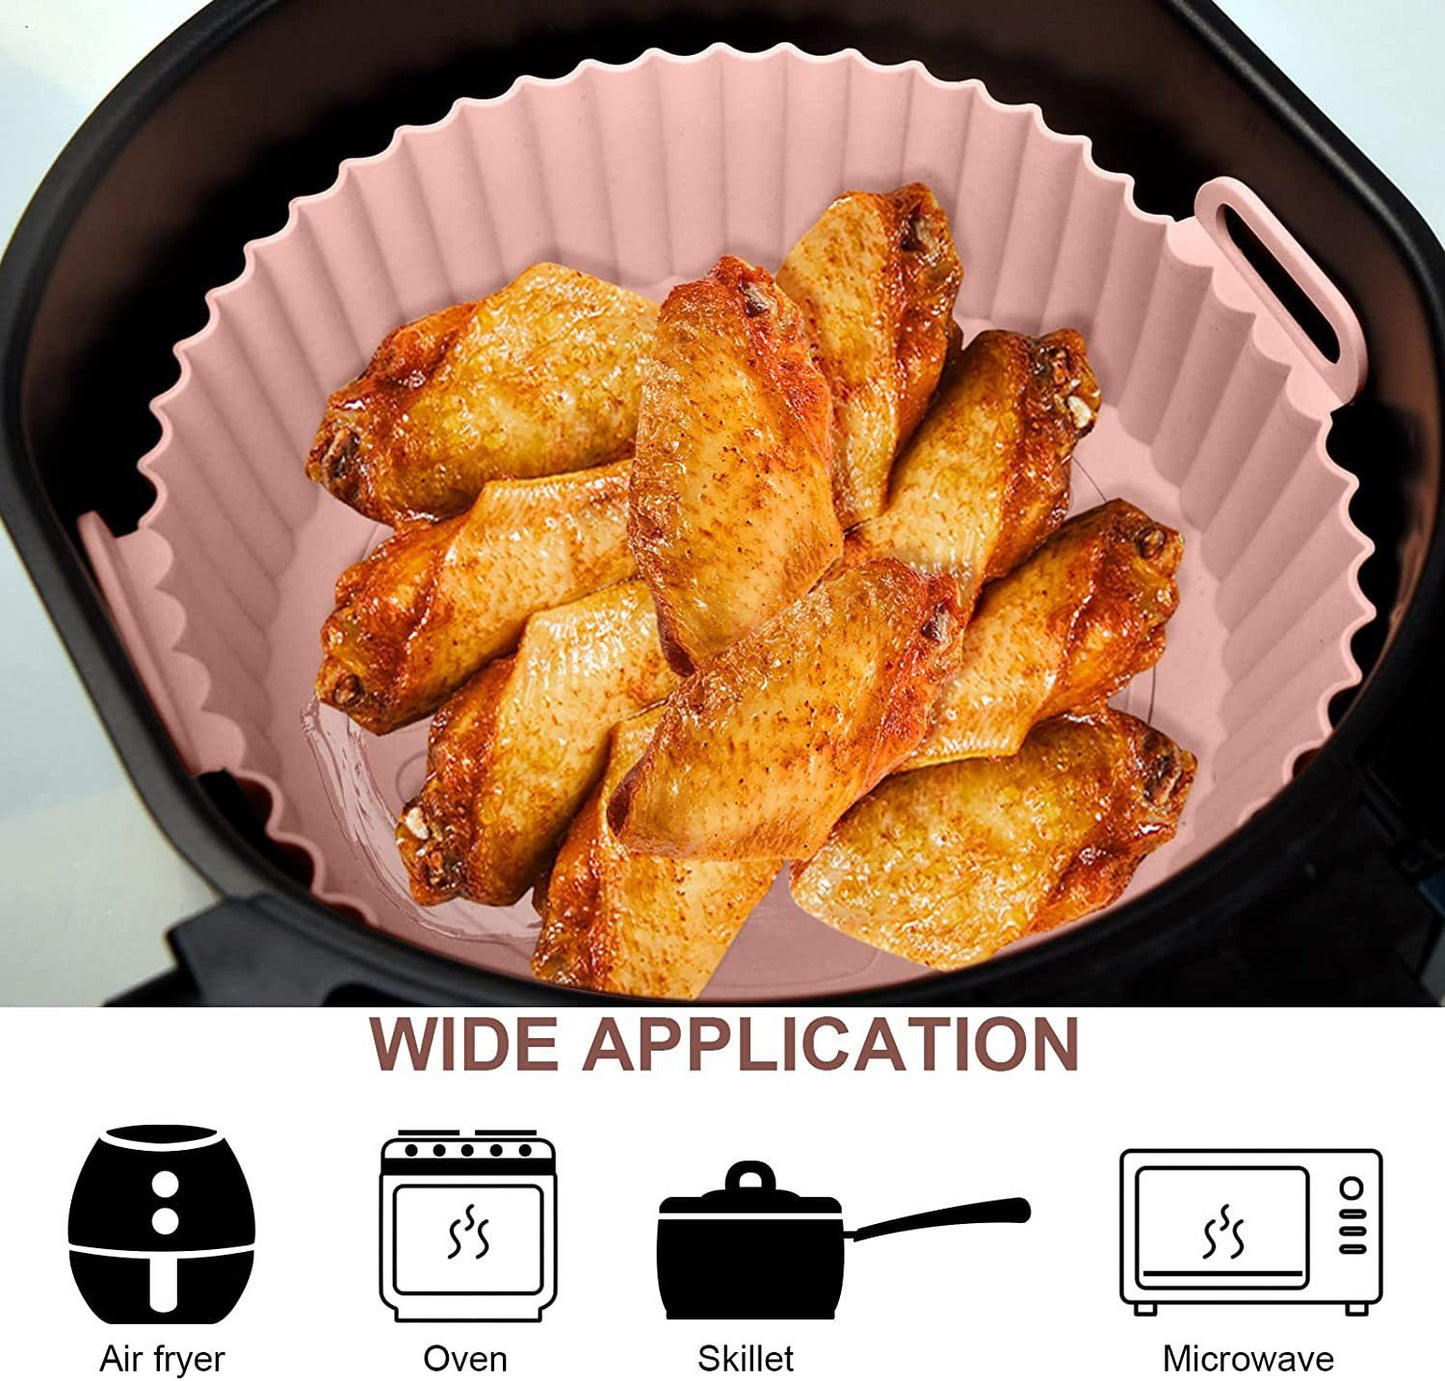 🔥Last Day 70% OFF🔥Air Fryer Silicone Baking Tray